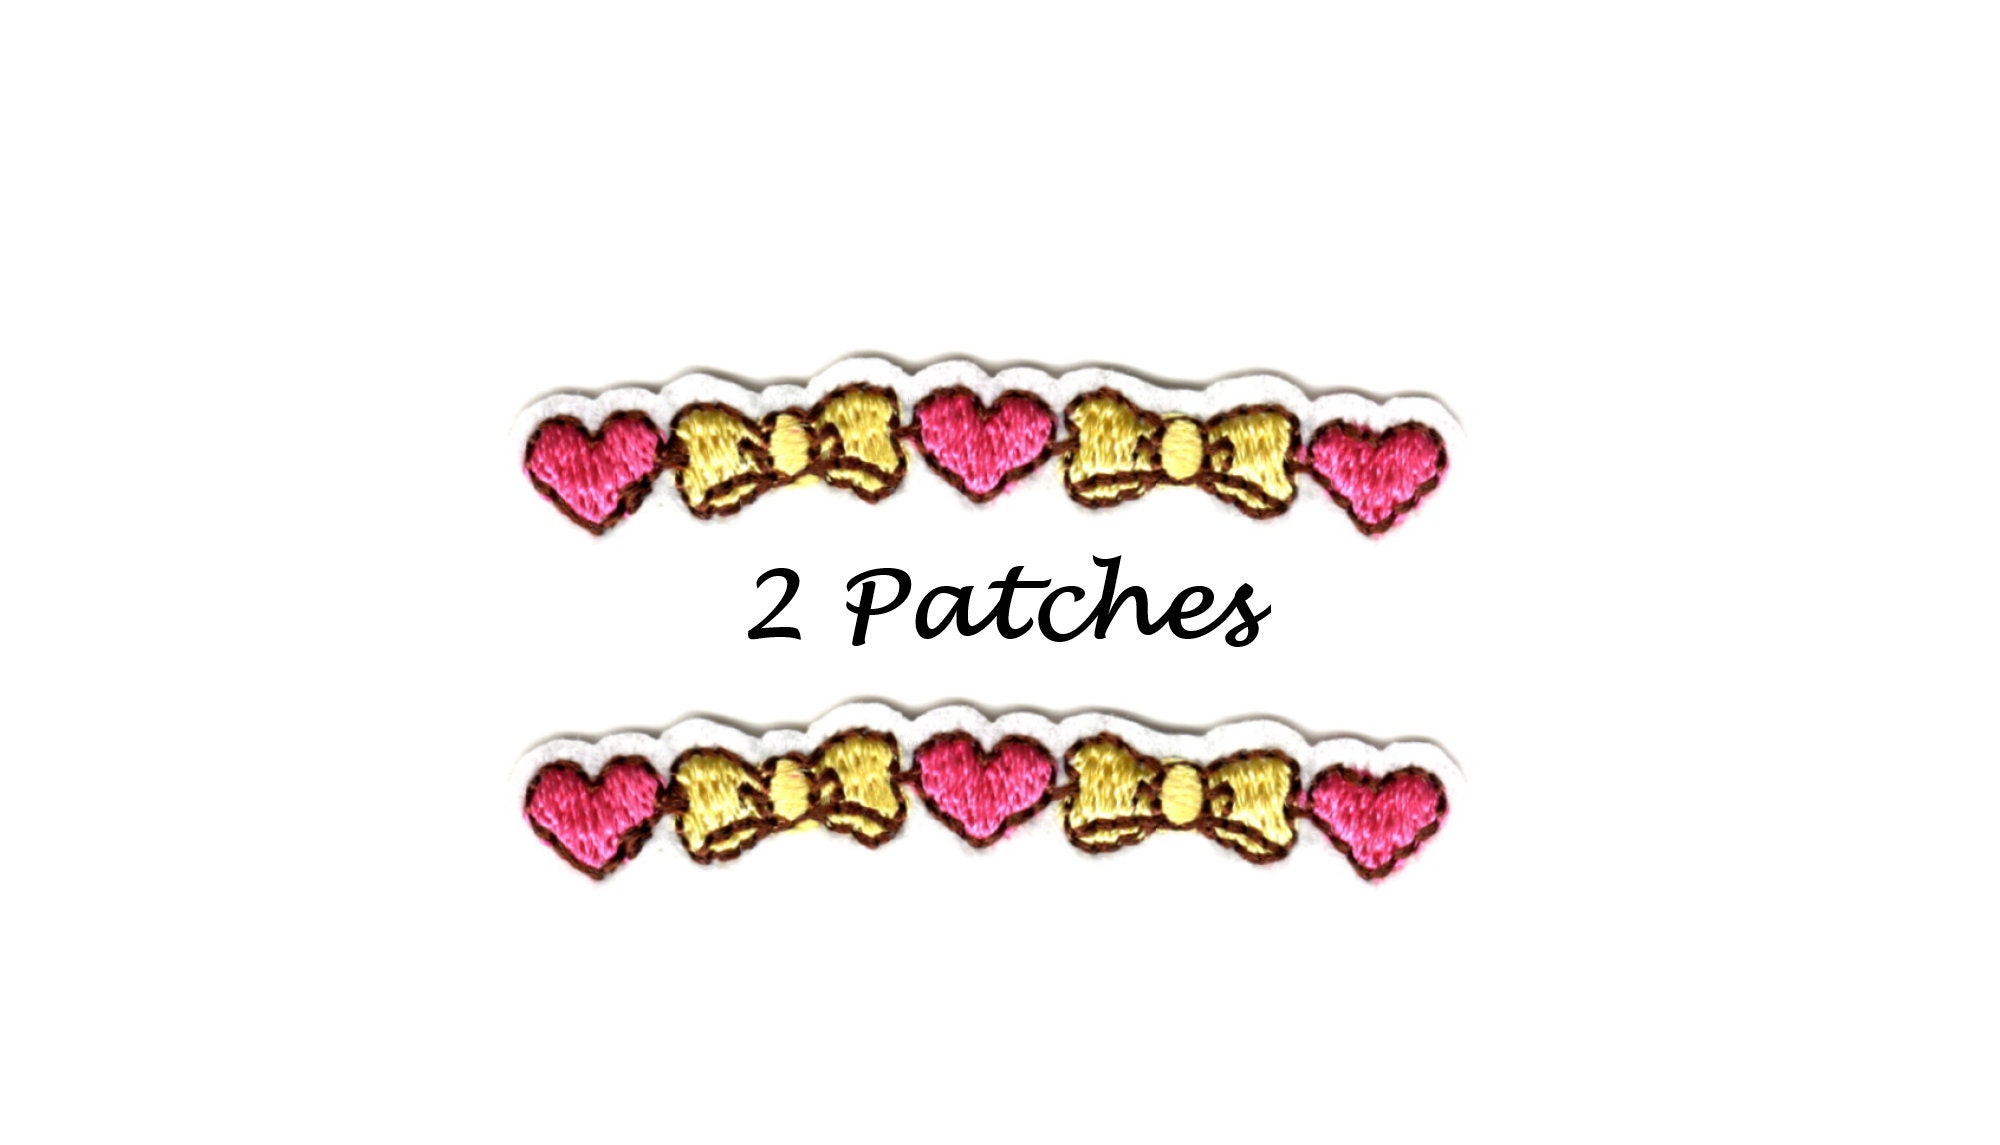 Barbie Doll Inspired Accessories Accessory Embroidered Iron-on Patches 